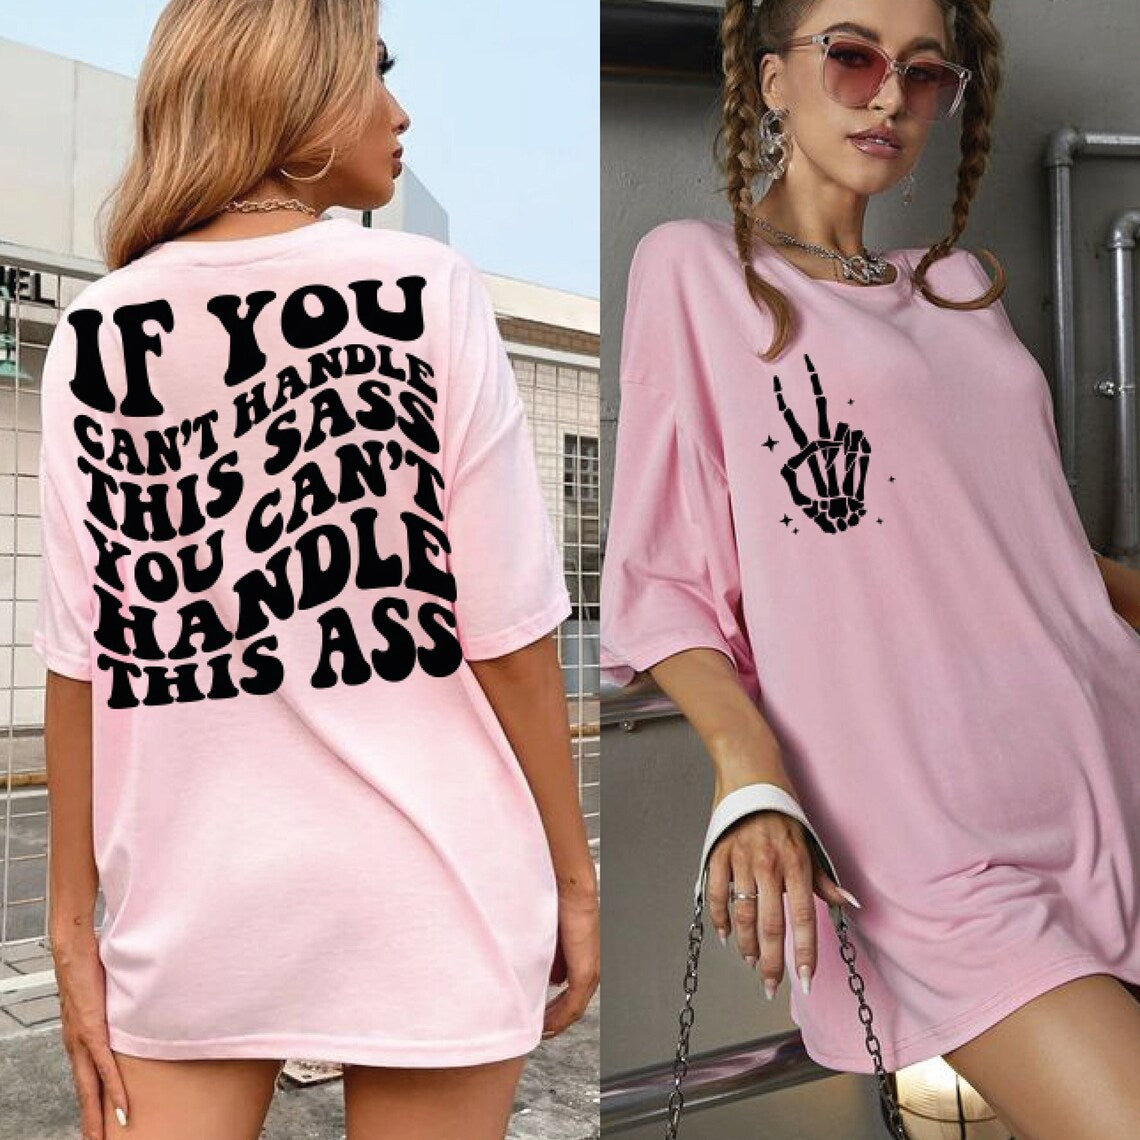 If you can't handle this sass you can't handle this ass SINGLE COLOR BLACK  size ADULT FRONT  BACK  DTF TRANSFERPRINT TO ORDER